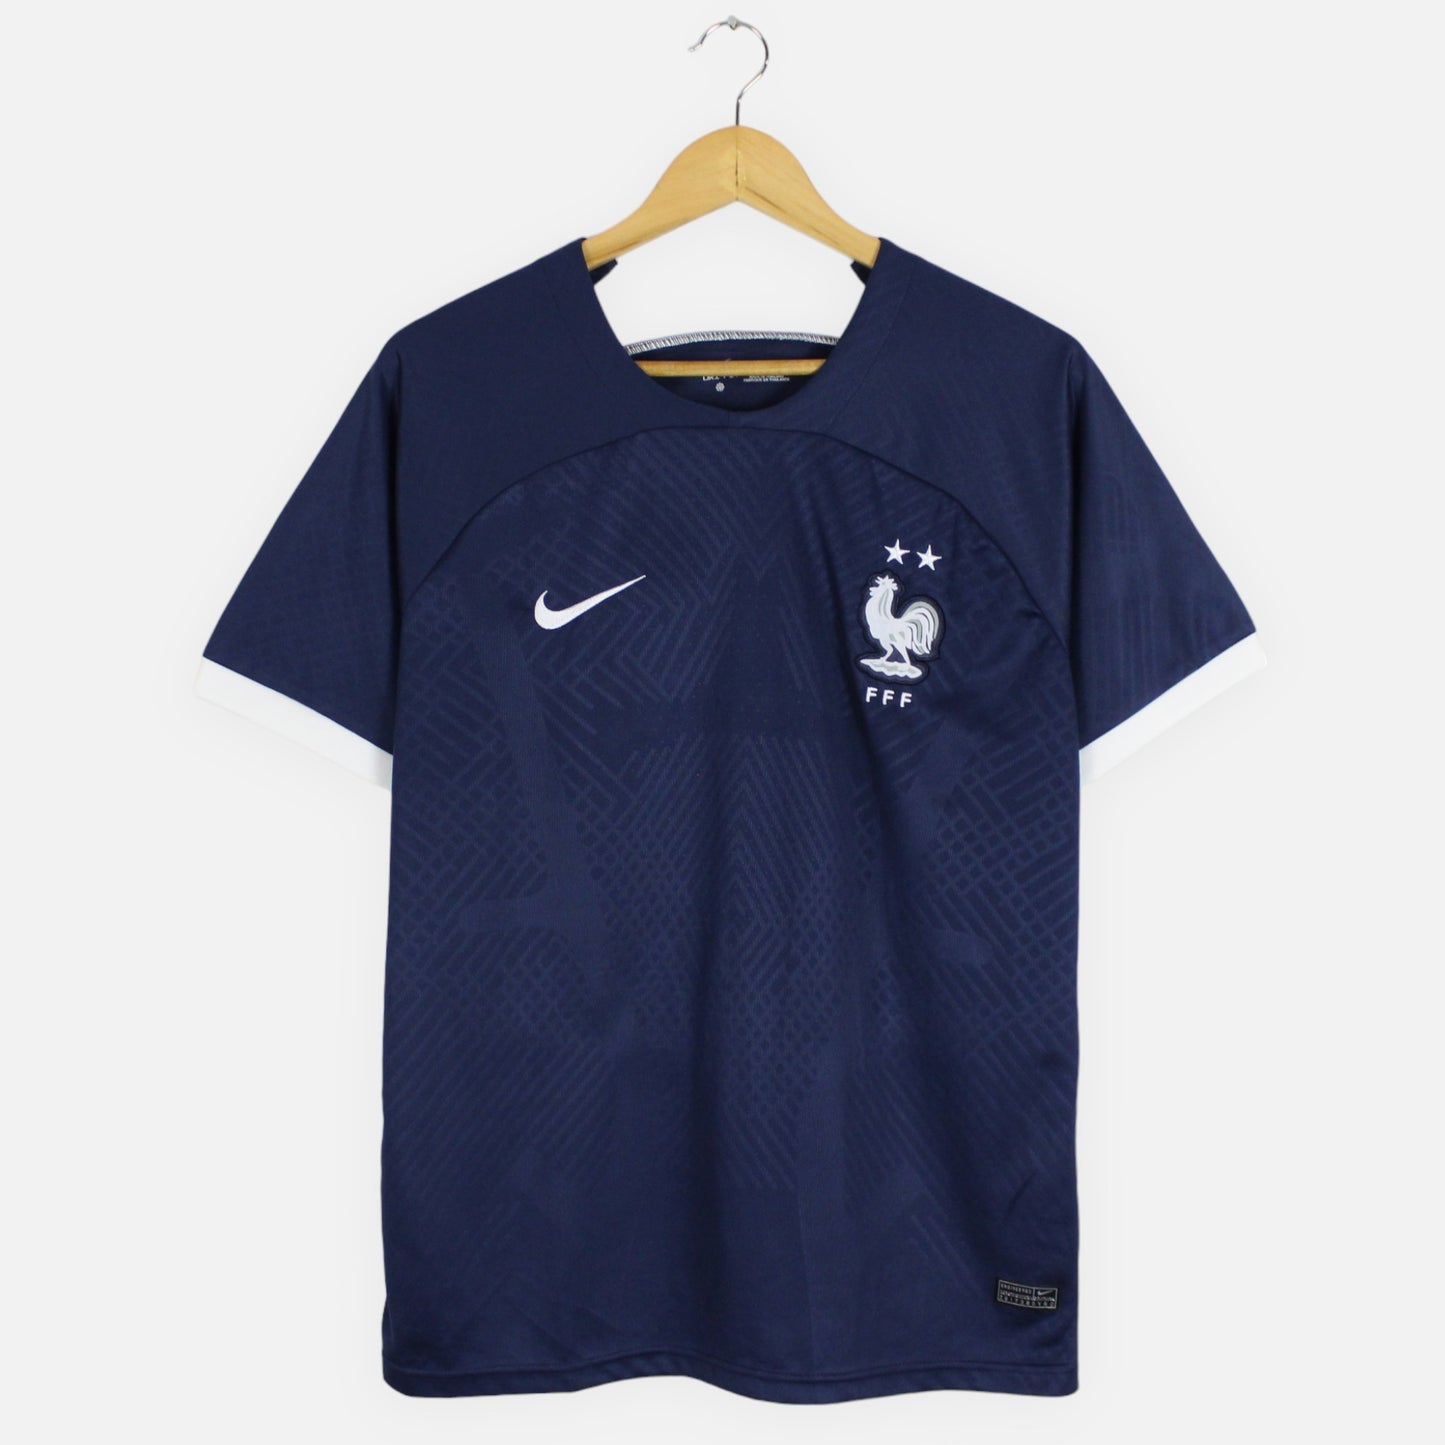 France 2019/20 Home Nike Jersey - M